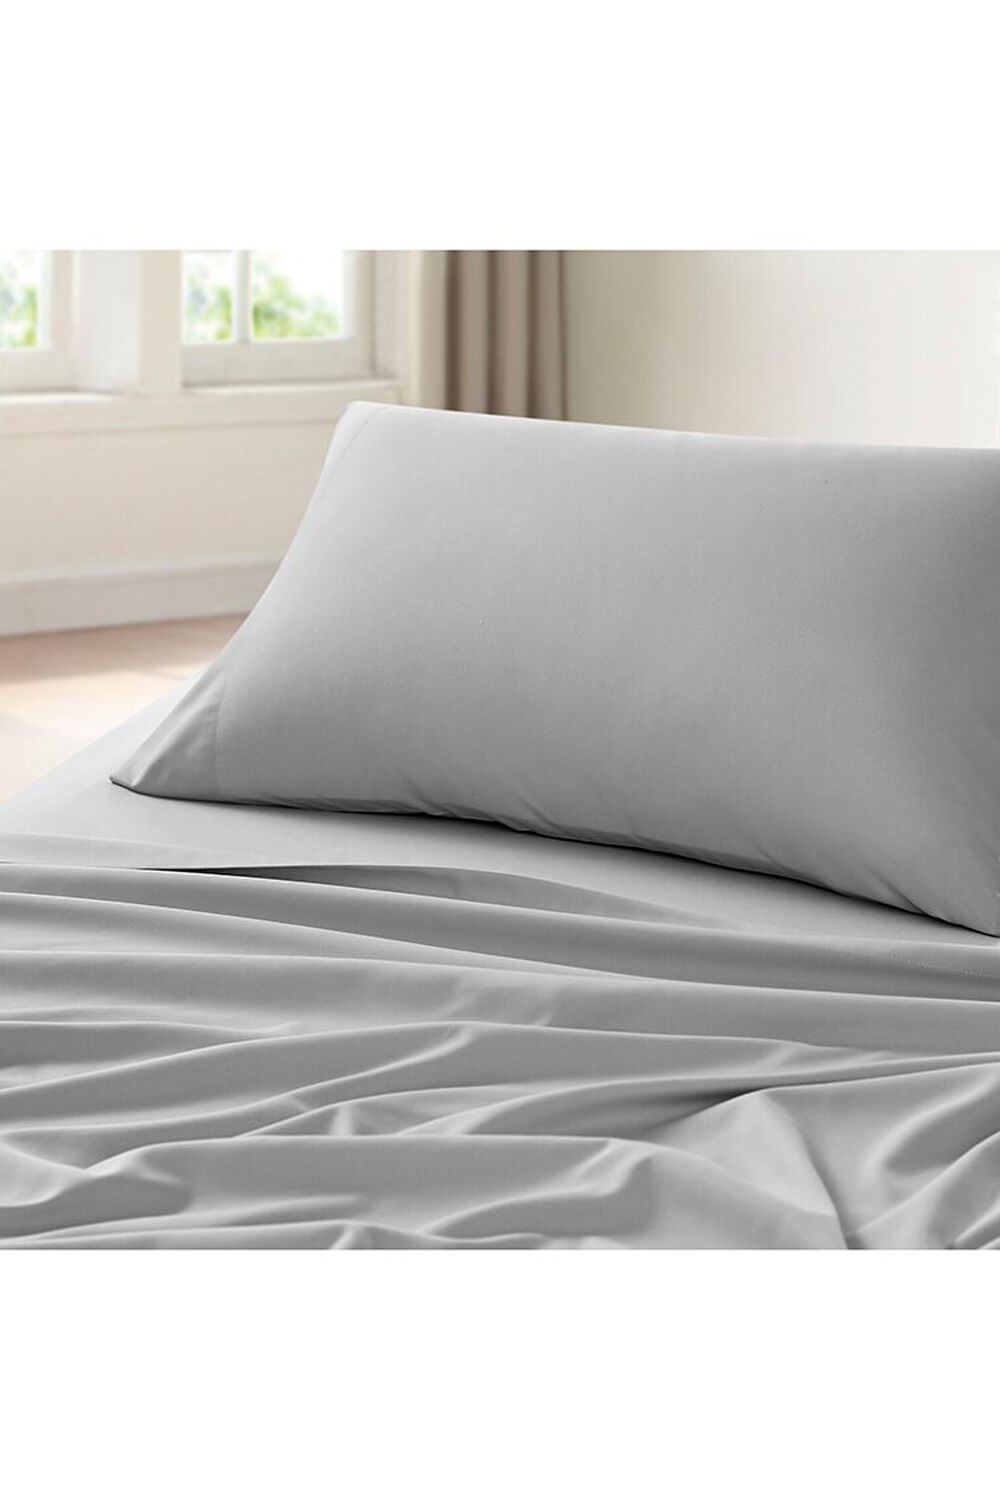 GREY Queen-Sized Sheet Set, image 1